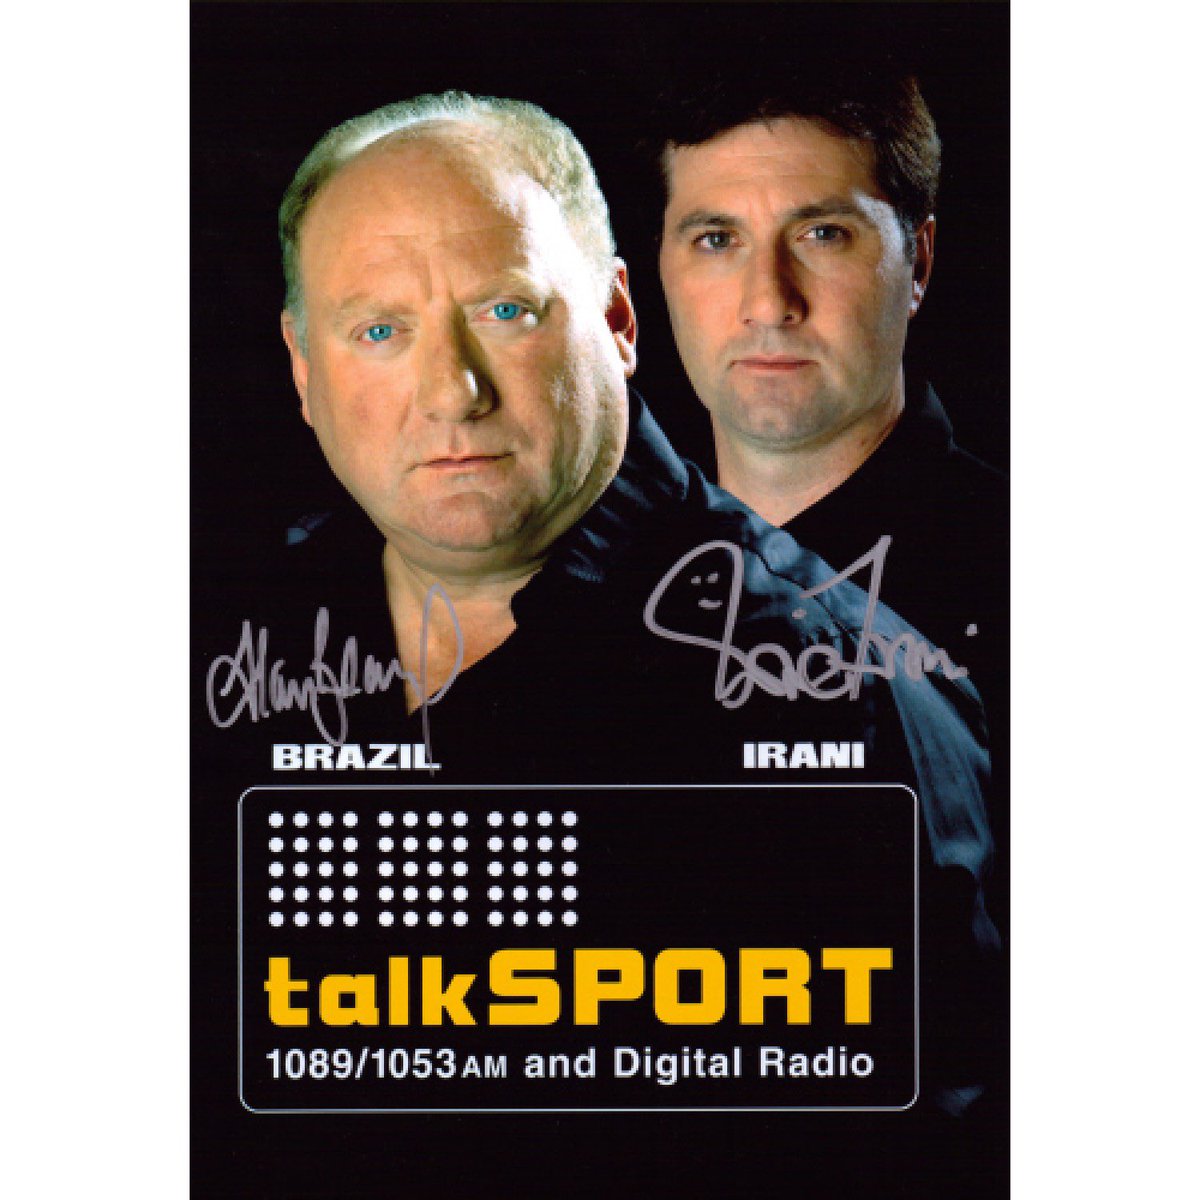 This was my favourite duo ever on TS. It felt real. Too much silly giggling these days and not as informative. Stopped listening while back @talkSPORT @alanbrazil @RonnieIrani